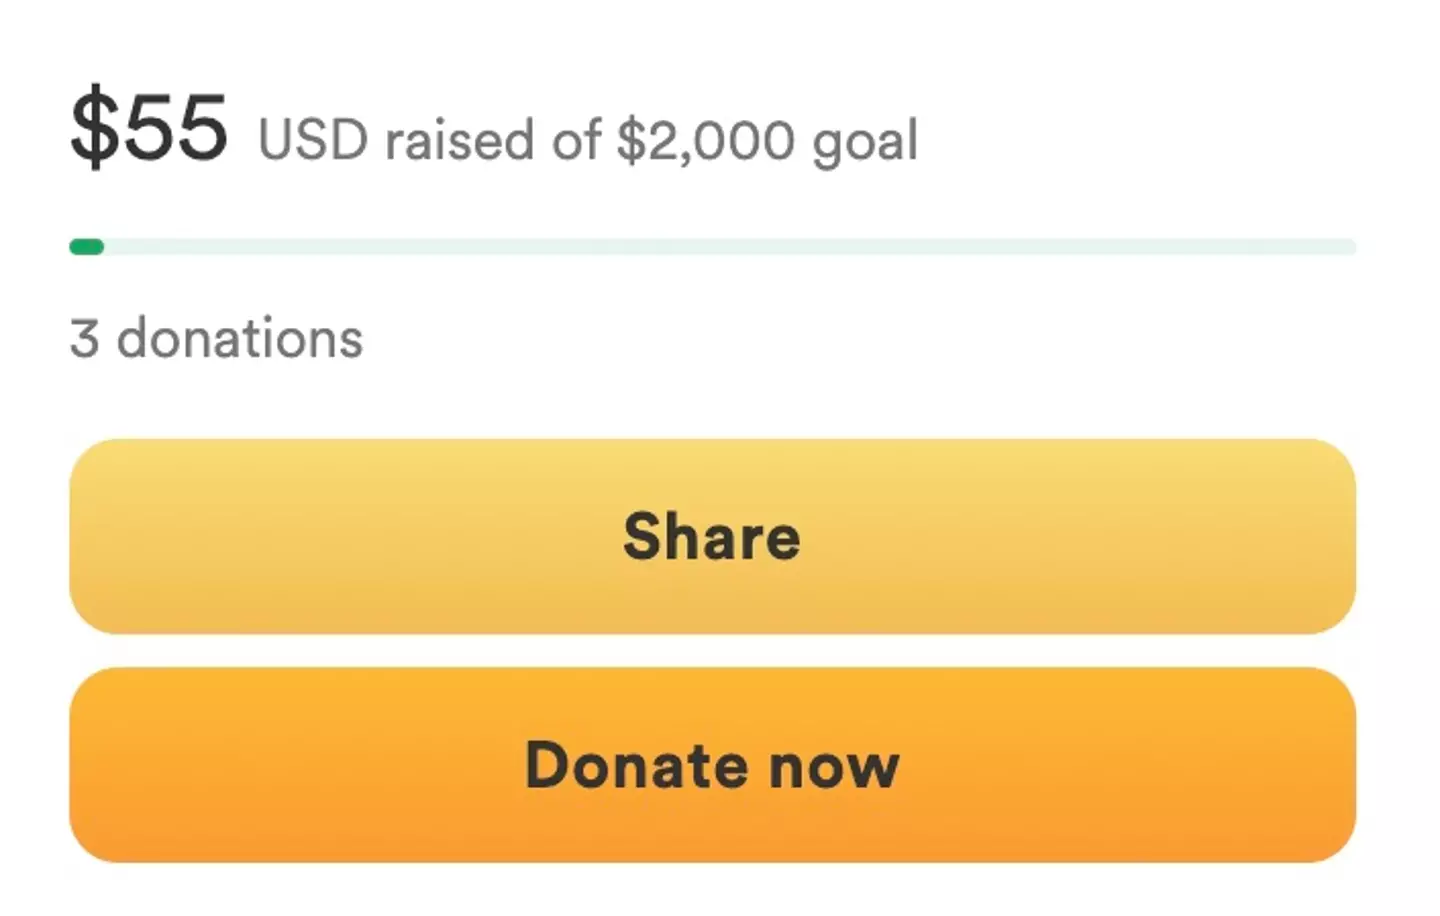 The GoFundMe campaigns have received varying results.